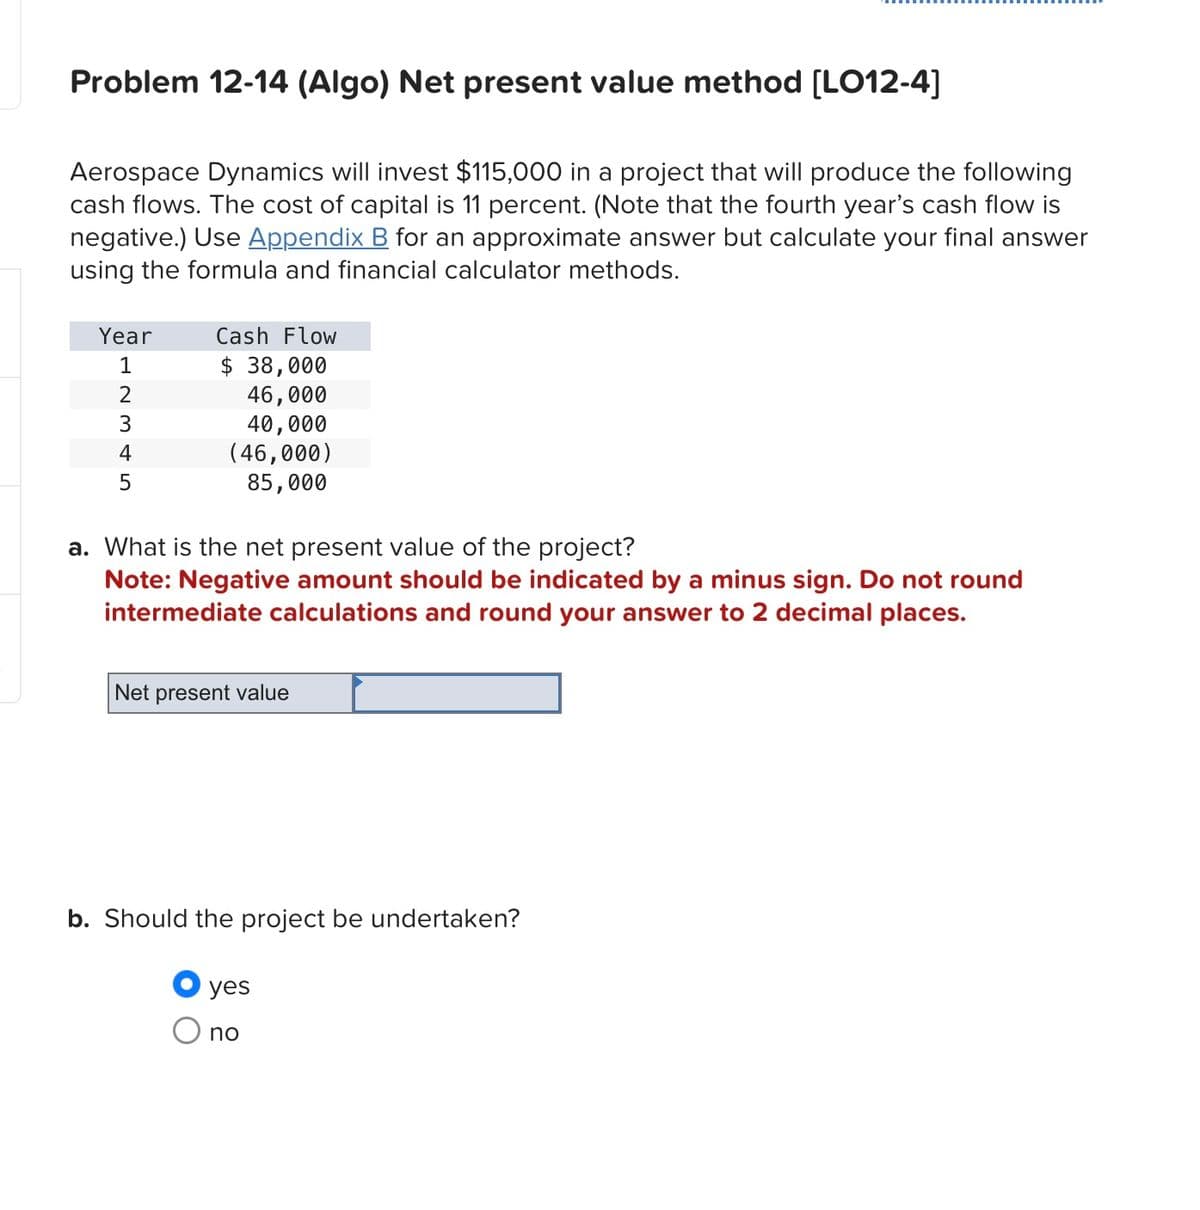 Problem 12-14 (Algo) Net present value method [LO12-4]
Aerospace Dynamics will invest $115,000 in a project that will produce the following
cash flows. The cost of capital is 11 percent. (Note that the fourth year's cash flow is
negative.) Use Appendix B for an approximate answer but calculate your final answer
using the formula and financial calculator methods.
Year
1
12345
Cash Flow
$ 38,000
46,000
40,000
(46,000)
85,000
a. What is the net present value of the project?
Note: Negative amount should be indicated by a minus sign. Do not round
intermediate calculations and round your answer to 2 decimal places.
Net present value
b. Should the project be undertaken?
yes
○ no